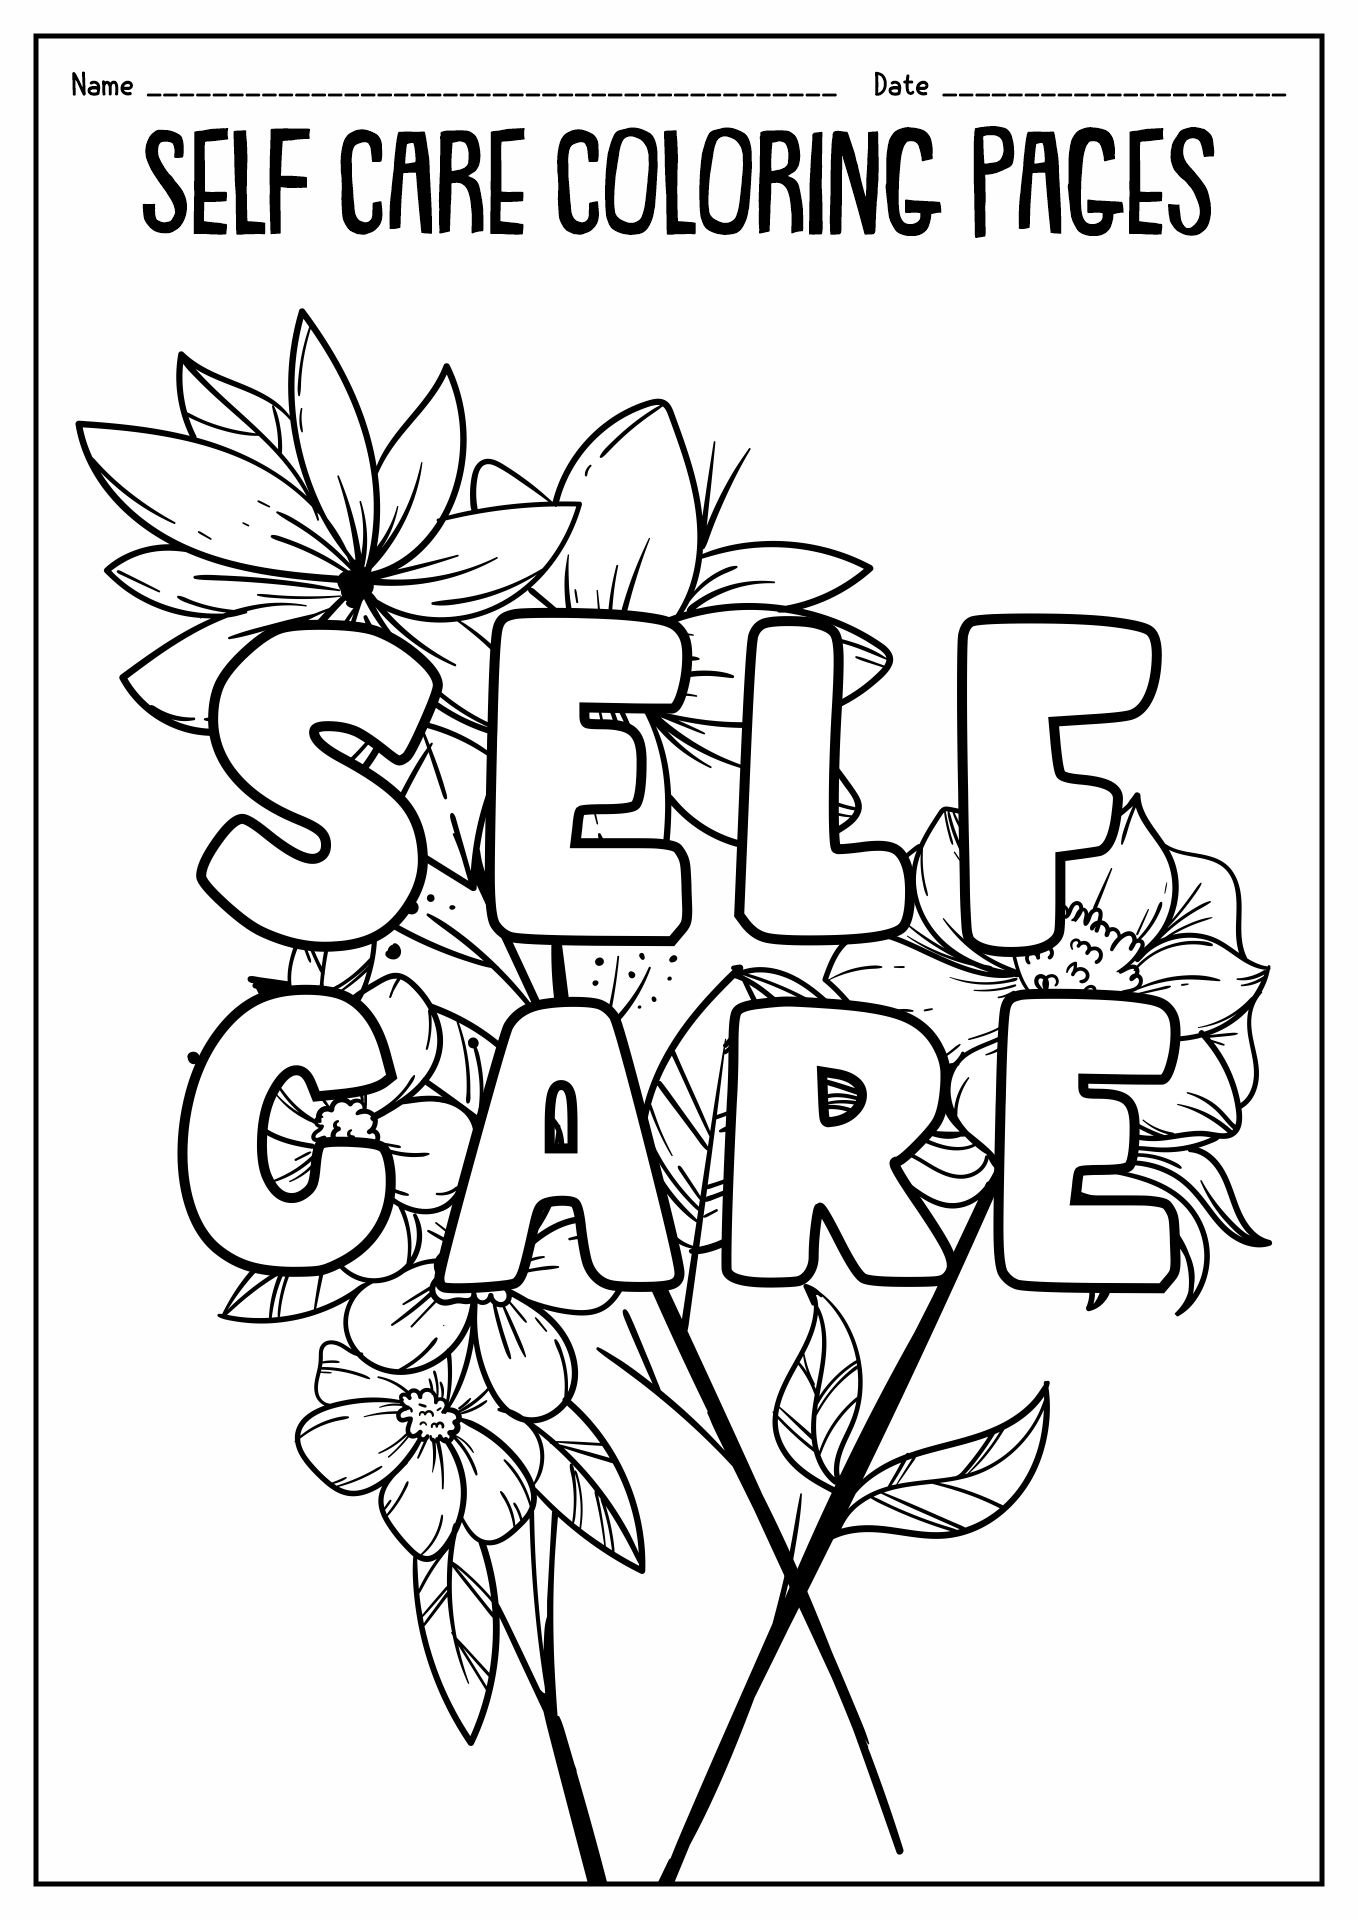 Self-Care Coloring Worksheets Image